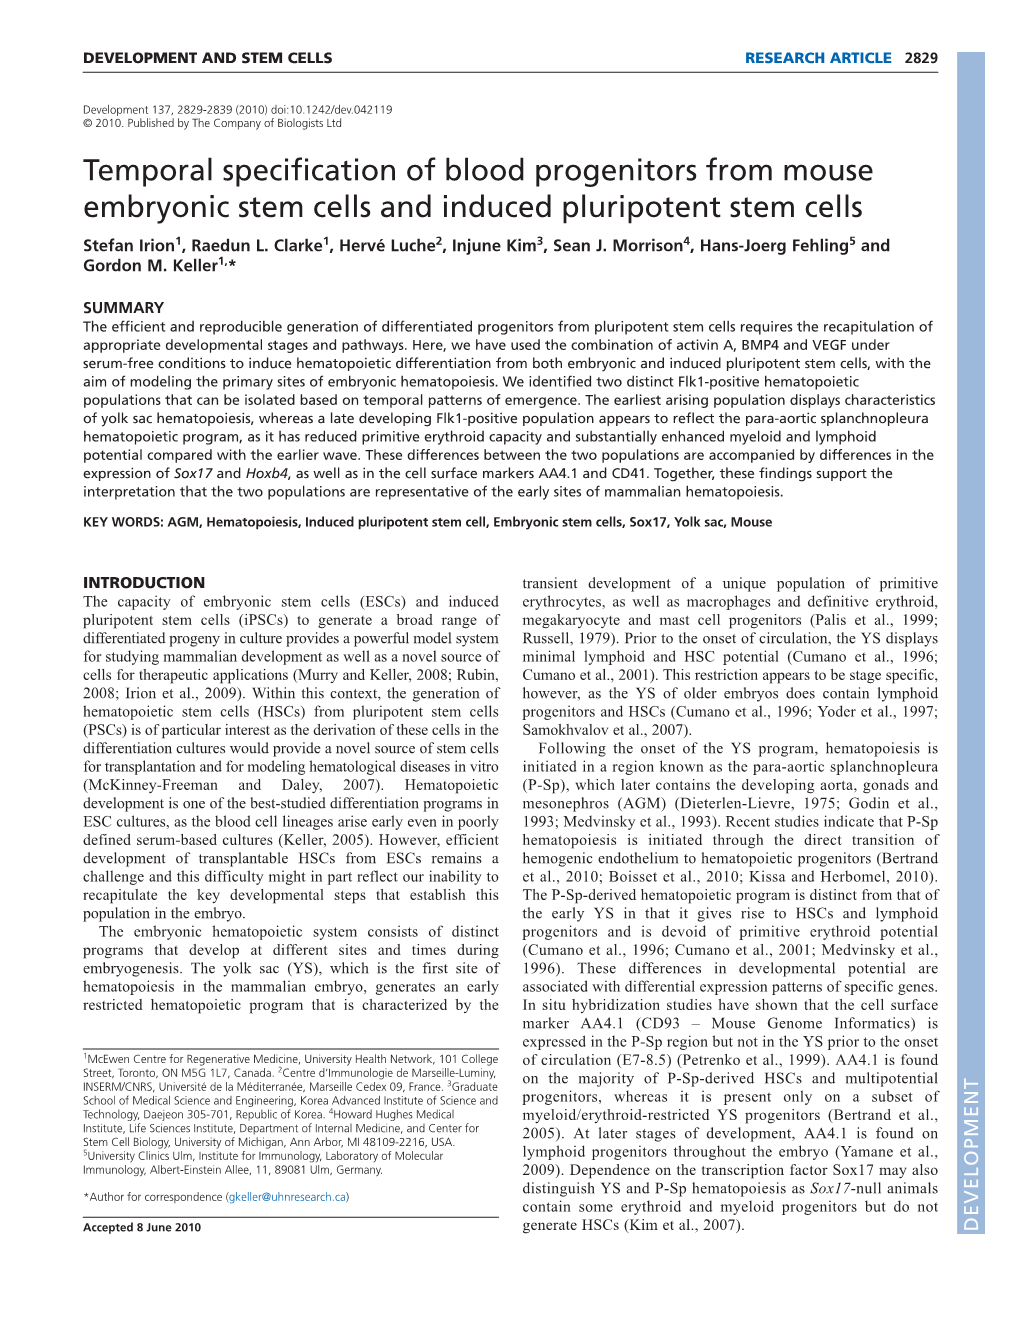 Temporal Specification of Blood Progenitors from Mouse Embryonic Stem Cells and Induced Pluripotent Stem Cells Stefan Irion1, Raedun L